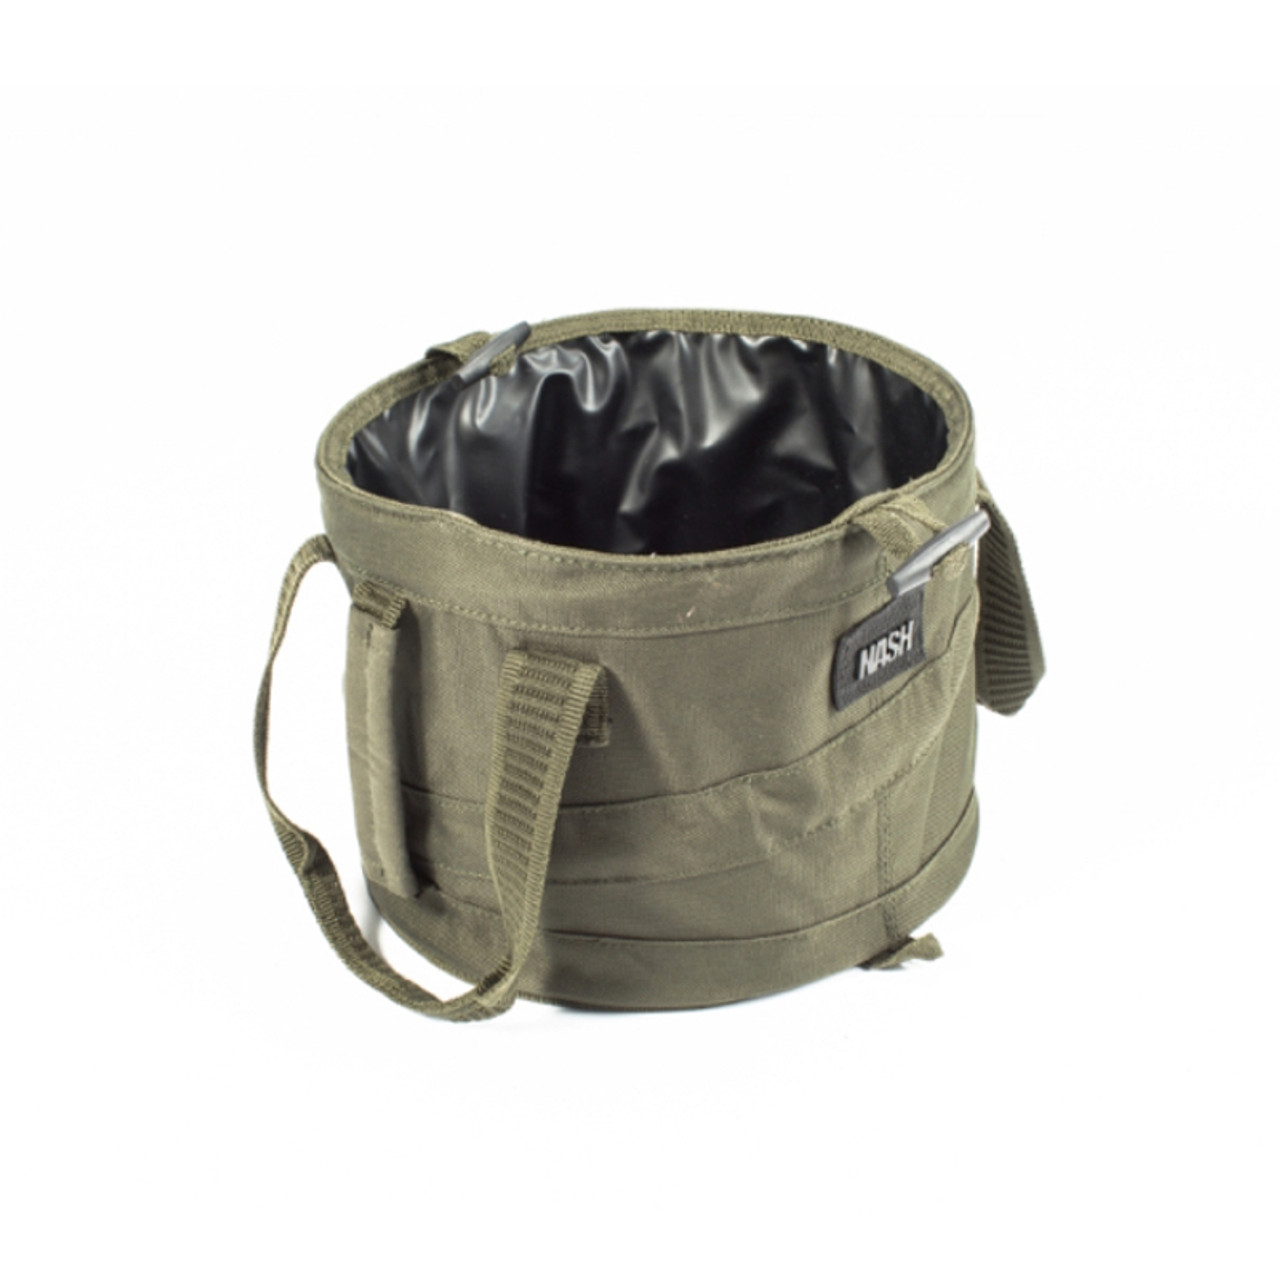 NGT Collapsible Water Bucket (7L)